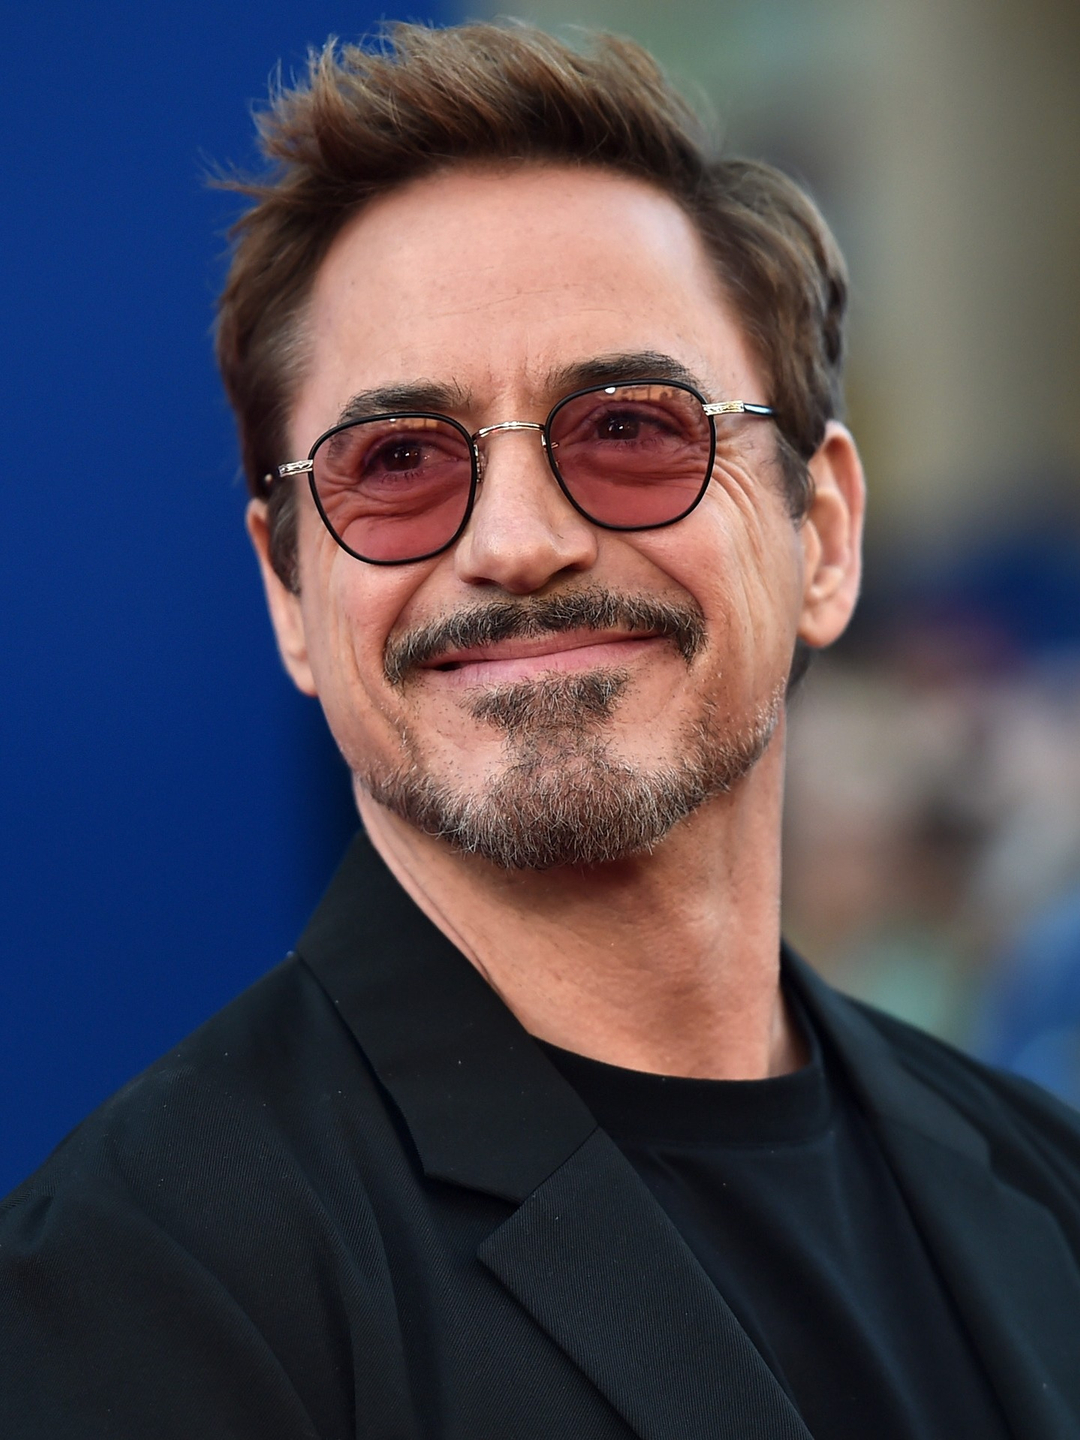 Robert Downey Jr. how did he became famous